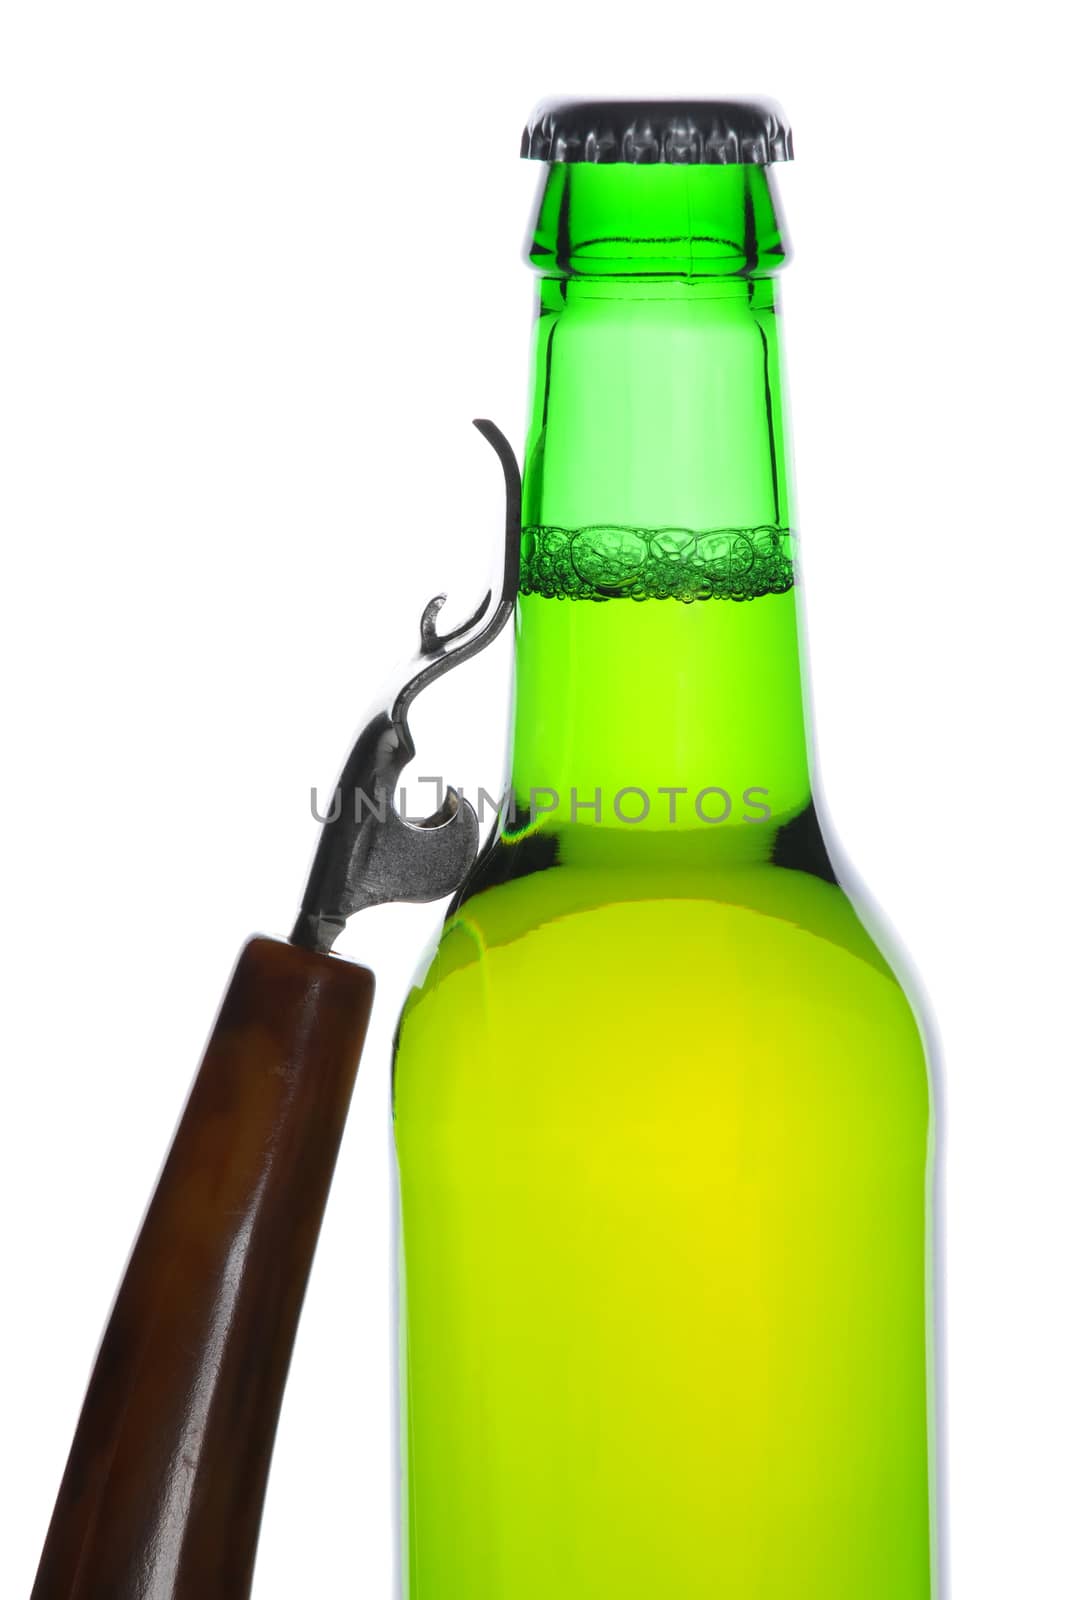 Green beer bottle with opener leaning against the side of the bottle, vertical composition isolated on white background.